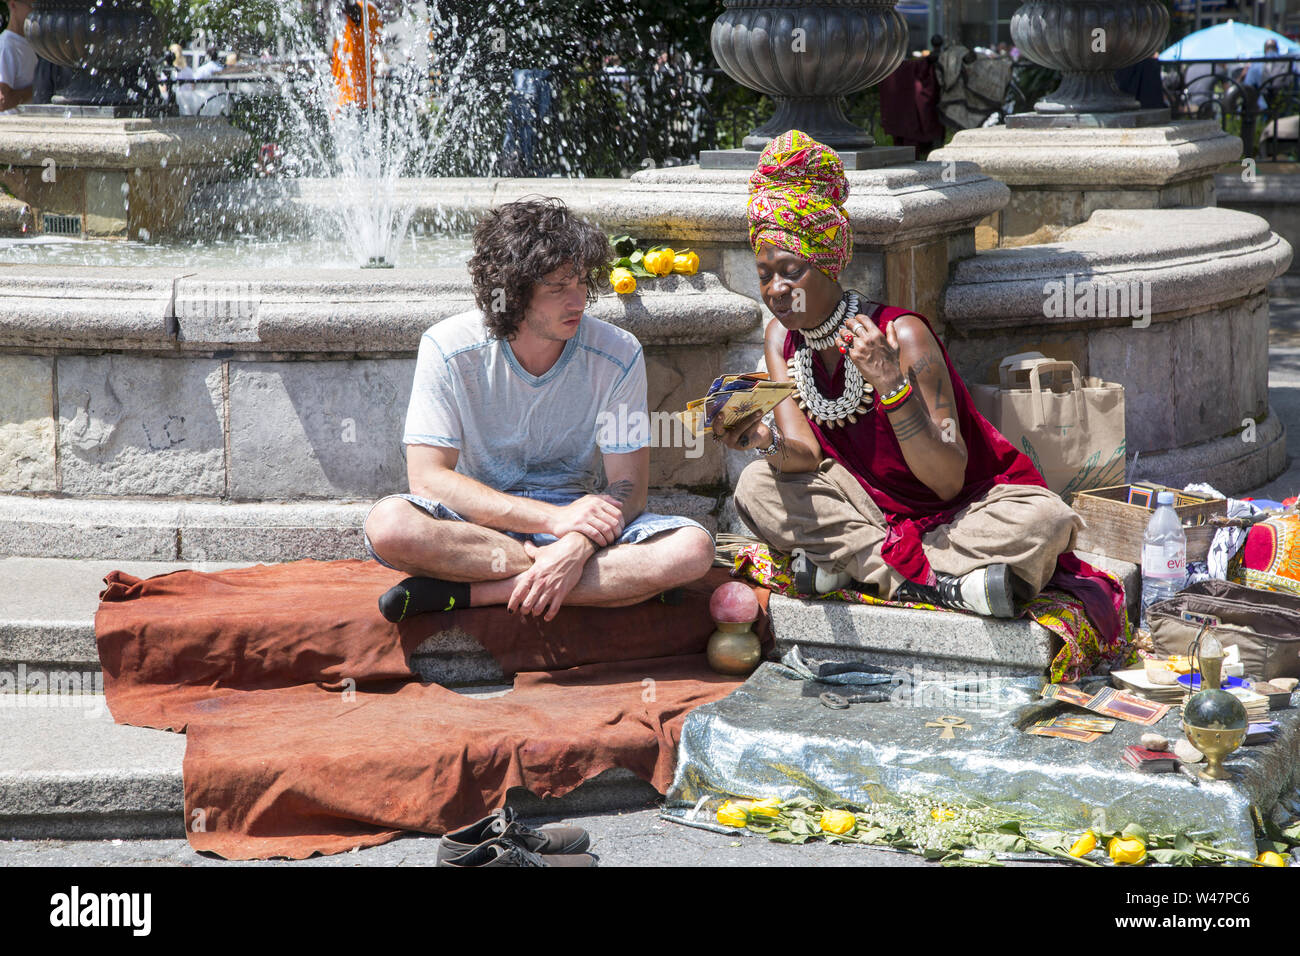 Young man consults a card reading fortune teller near the fountain in Union Square where she advises people about their possible futures. Manhattan, New York City. Stock Photo